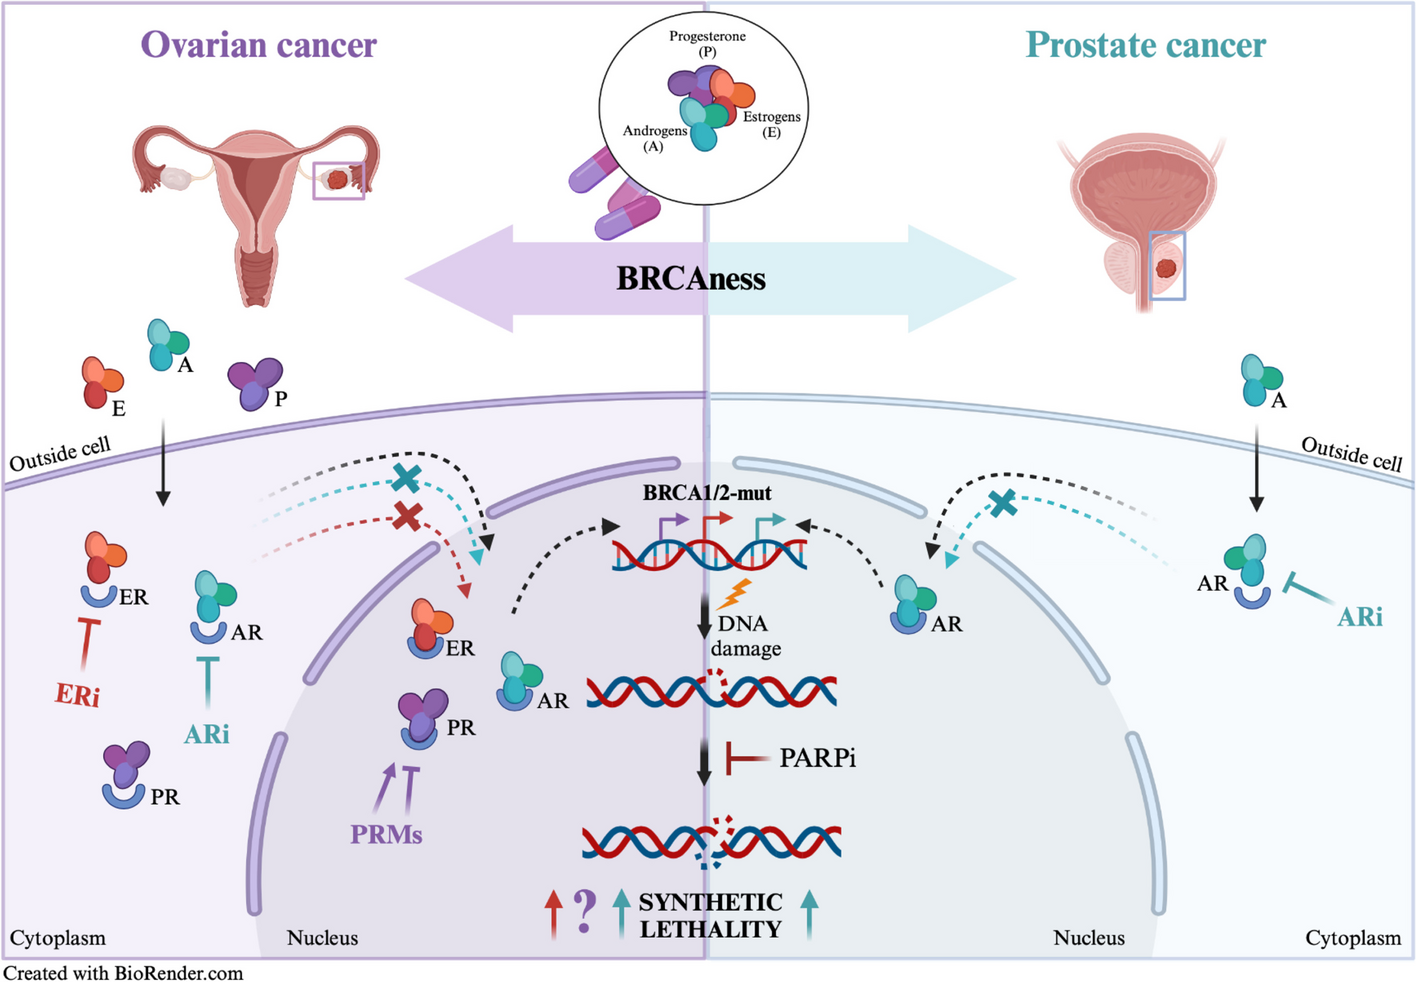 Novel frontiers in urogenital cancers: from molecular bases to preclinical models to tailor personalized treatments in ovarian and prostate cancer patients